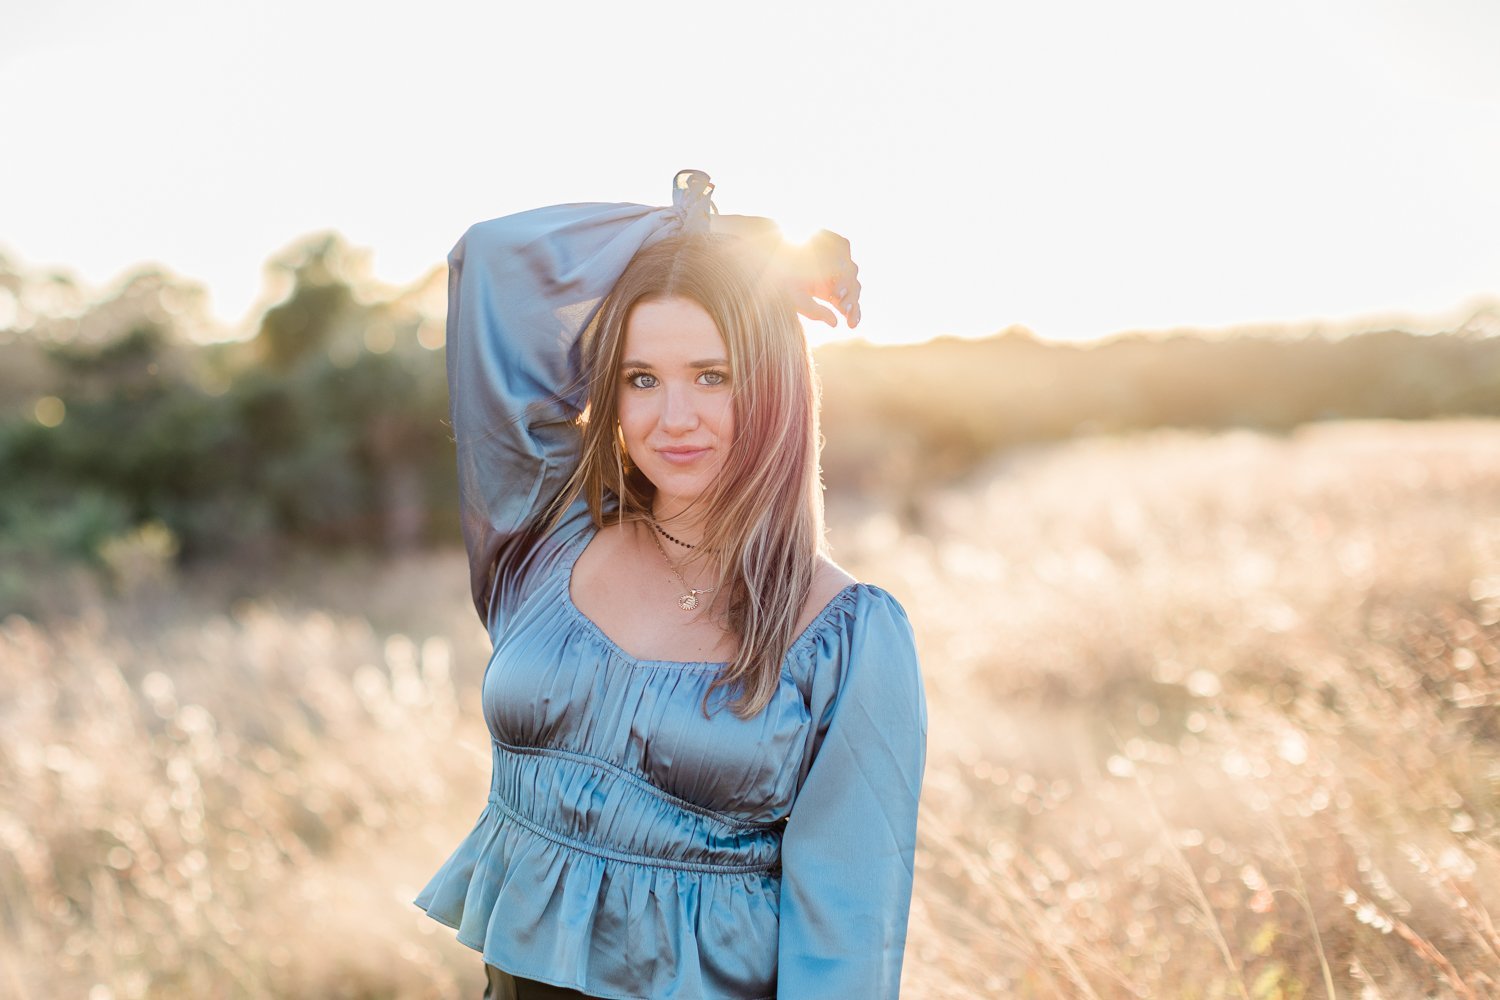 beautiful sunset backlit images of a senior girl in the grassy field near Ponte Vedra, FL